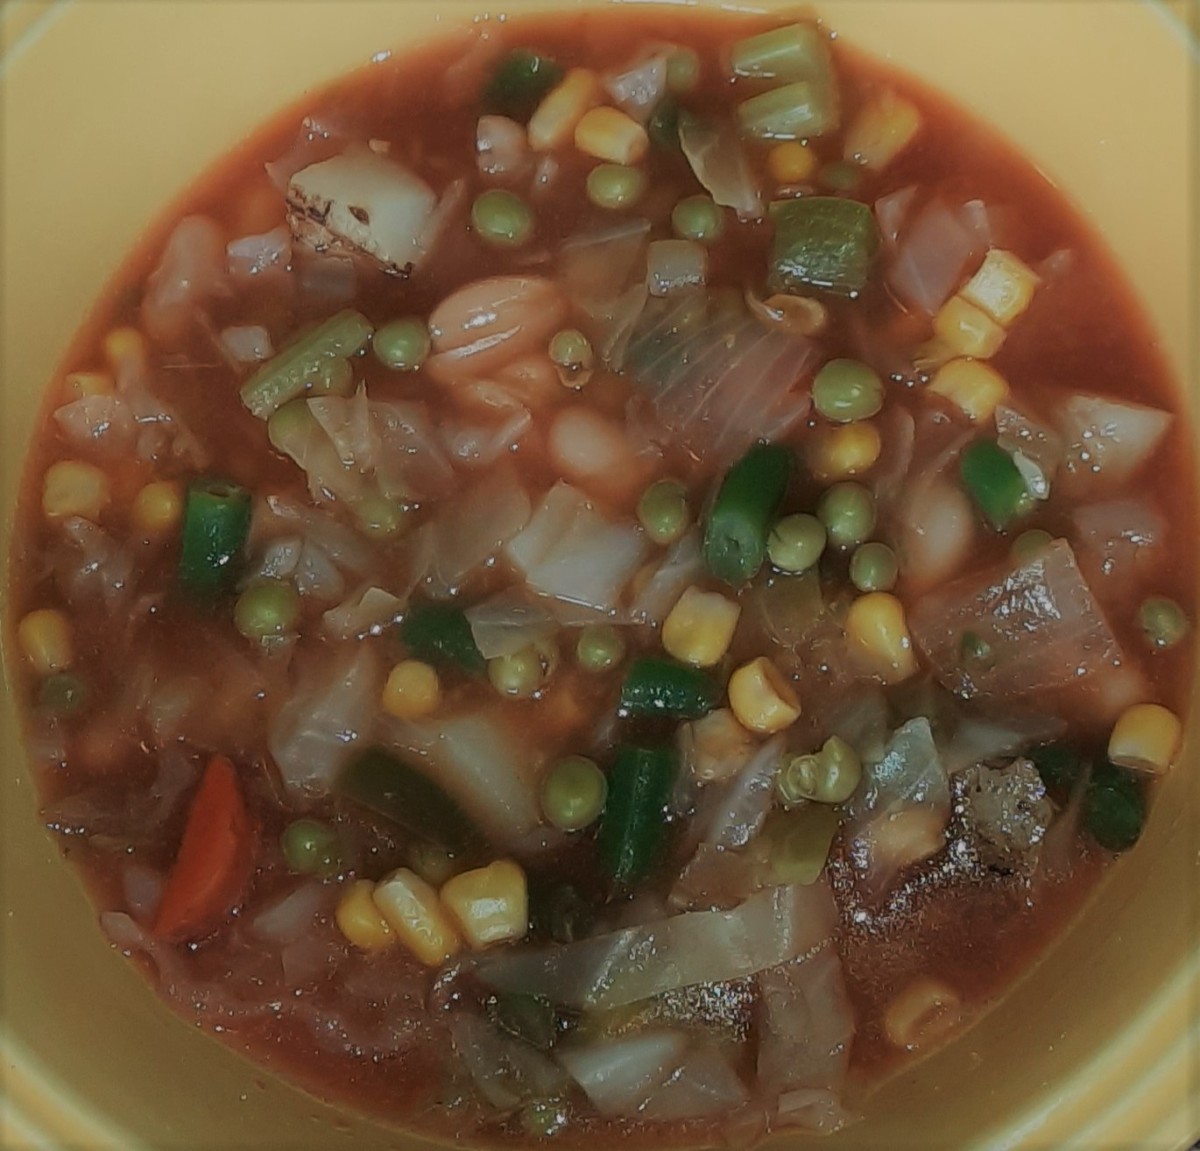 Aunt Margie and Gramma's Vegetable Soup